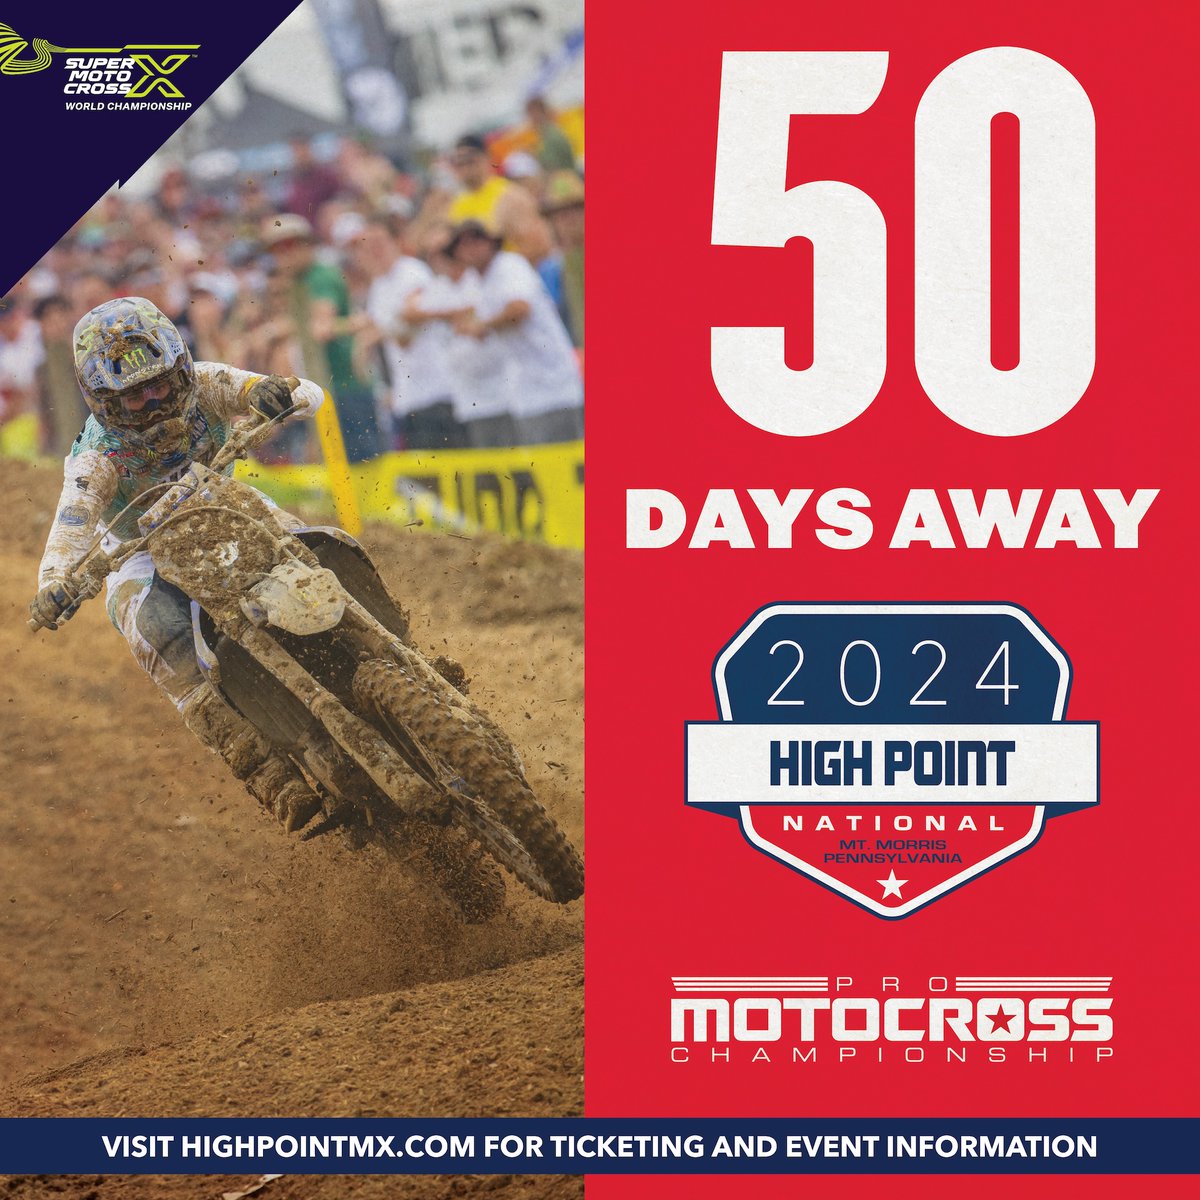 5️⃣0️⃣ DAYS until @ProMotocross comes to #HighPointMX. 

Visit the link below for ticketing and event information 🏁 @supermotocross #SMX #ProMotocross #HighPointMX 

bit.ly/4aPAK7U